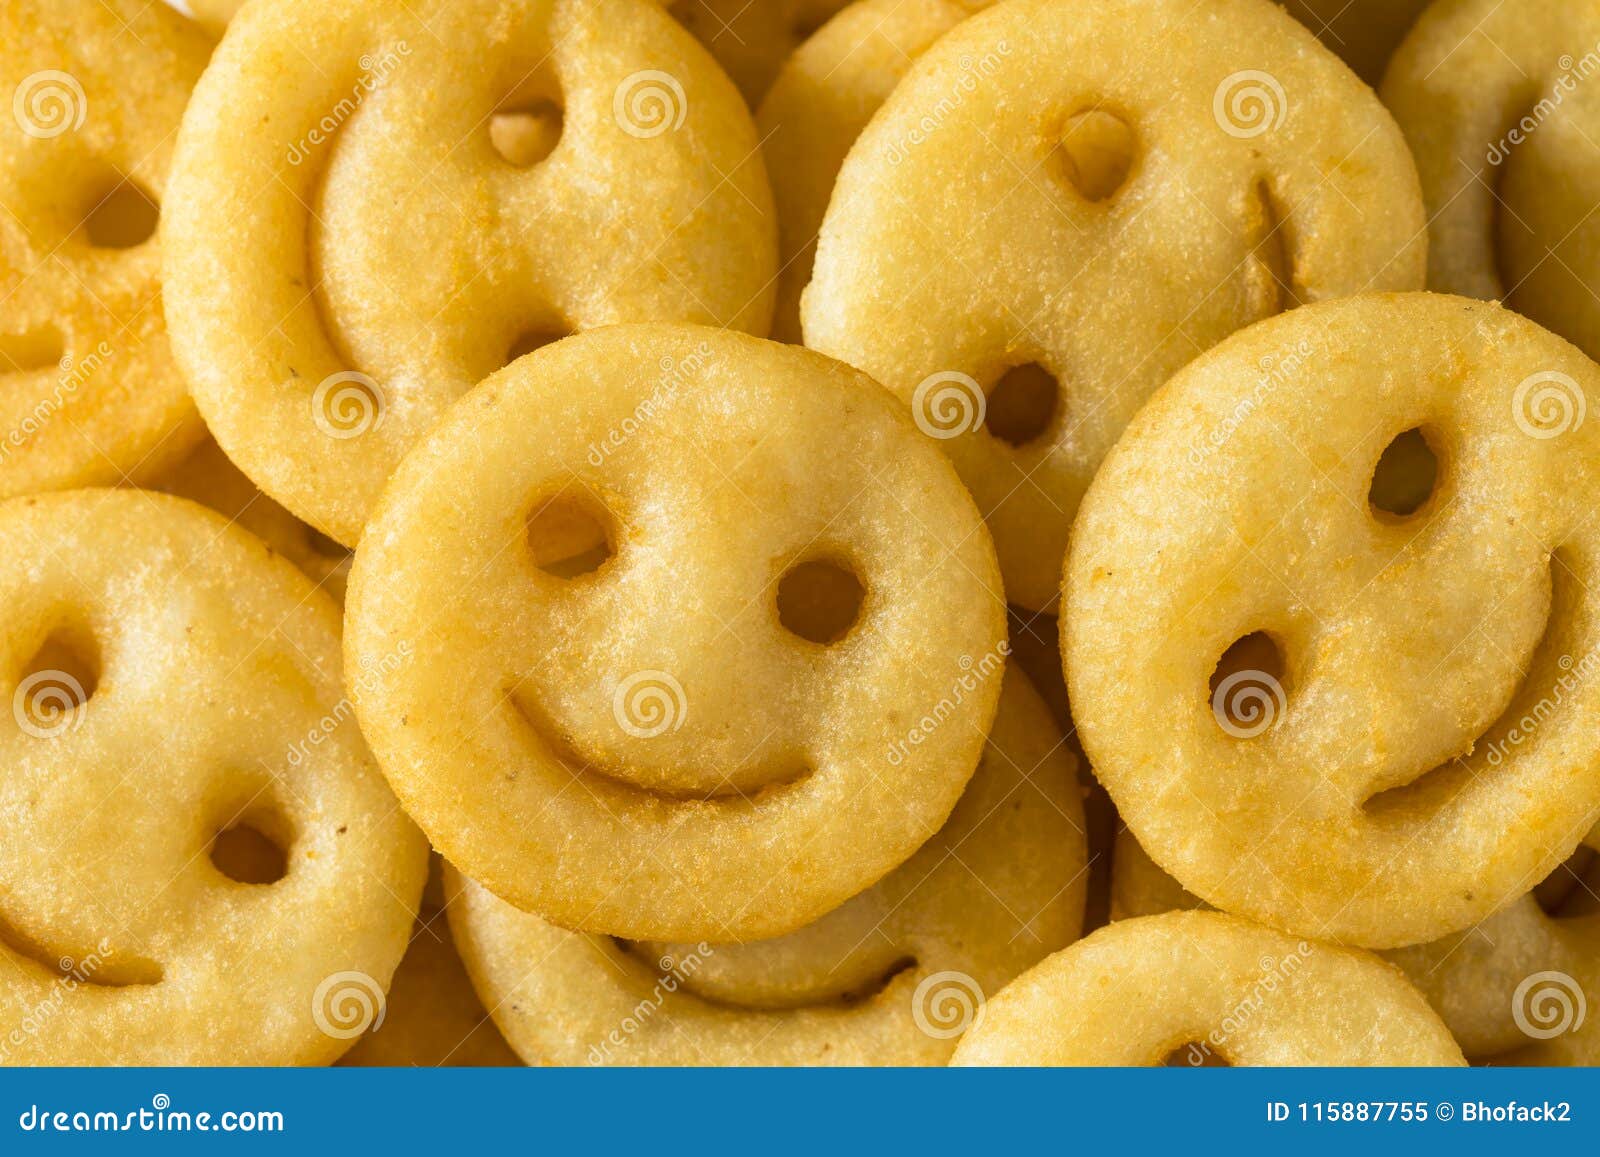 Homemade Smiley Face French Fries Stock Image   Image of calories ...